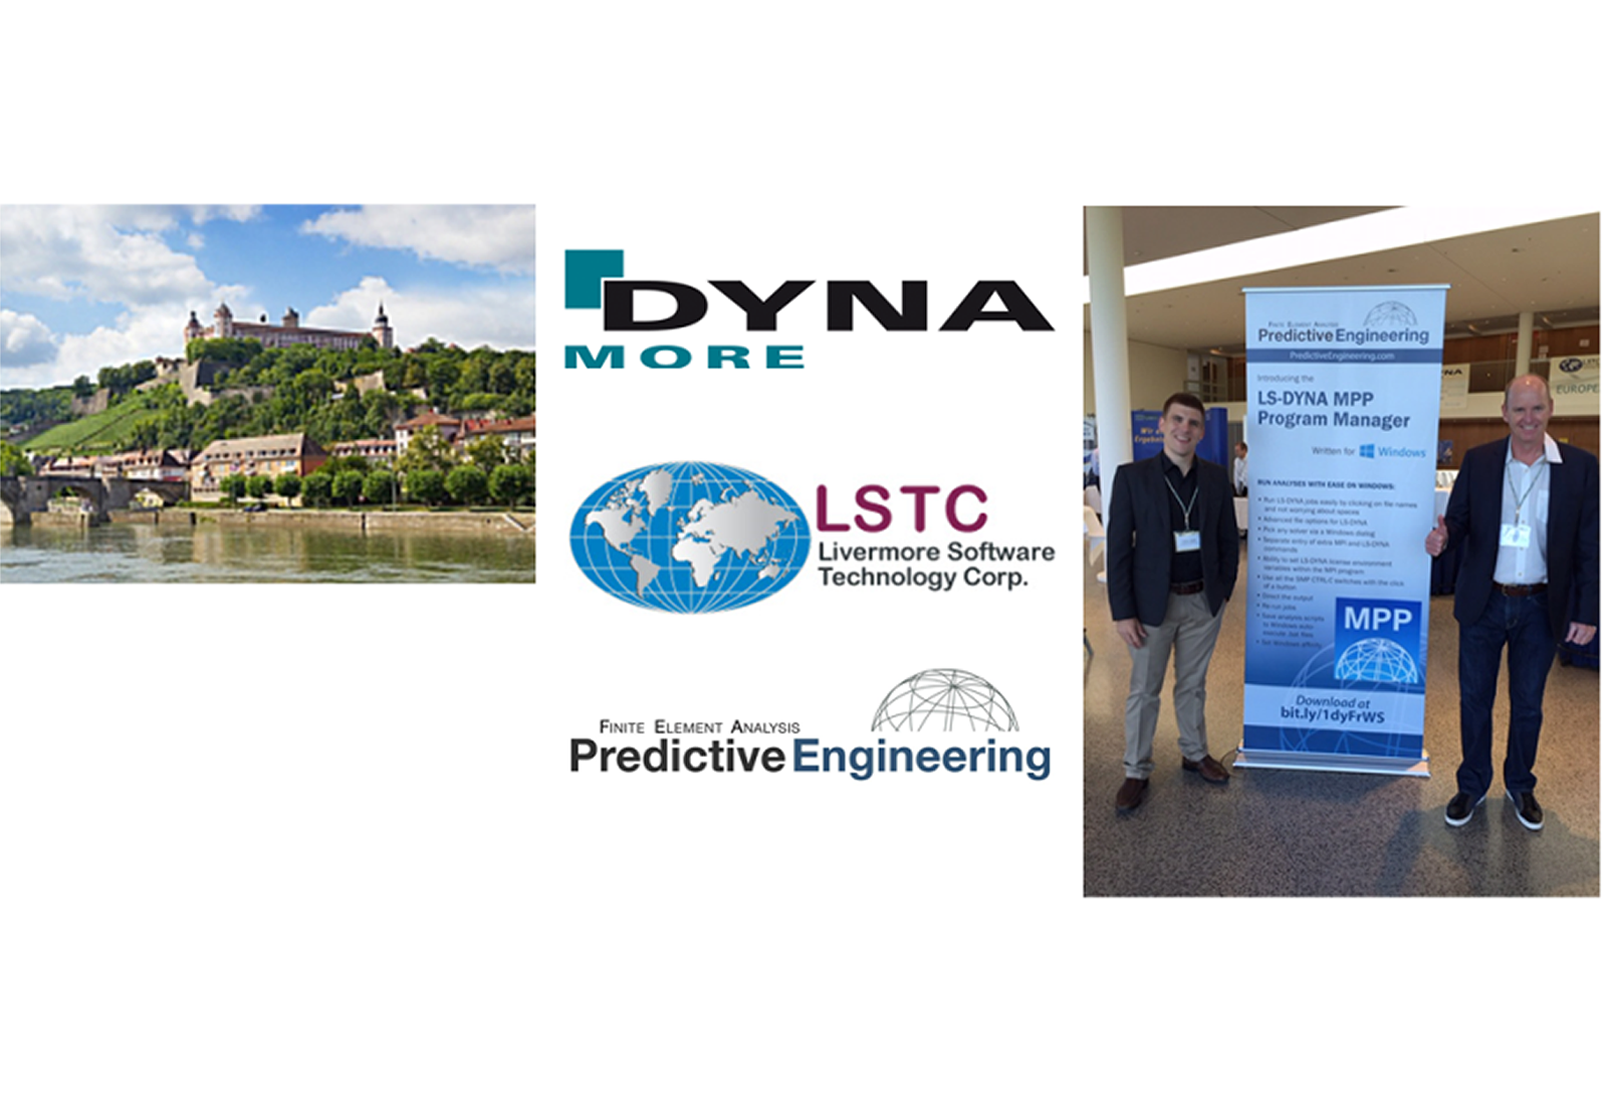 10th European LS-DYNA Conference, Wurzburg, Germany